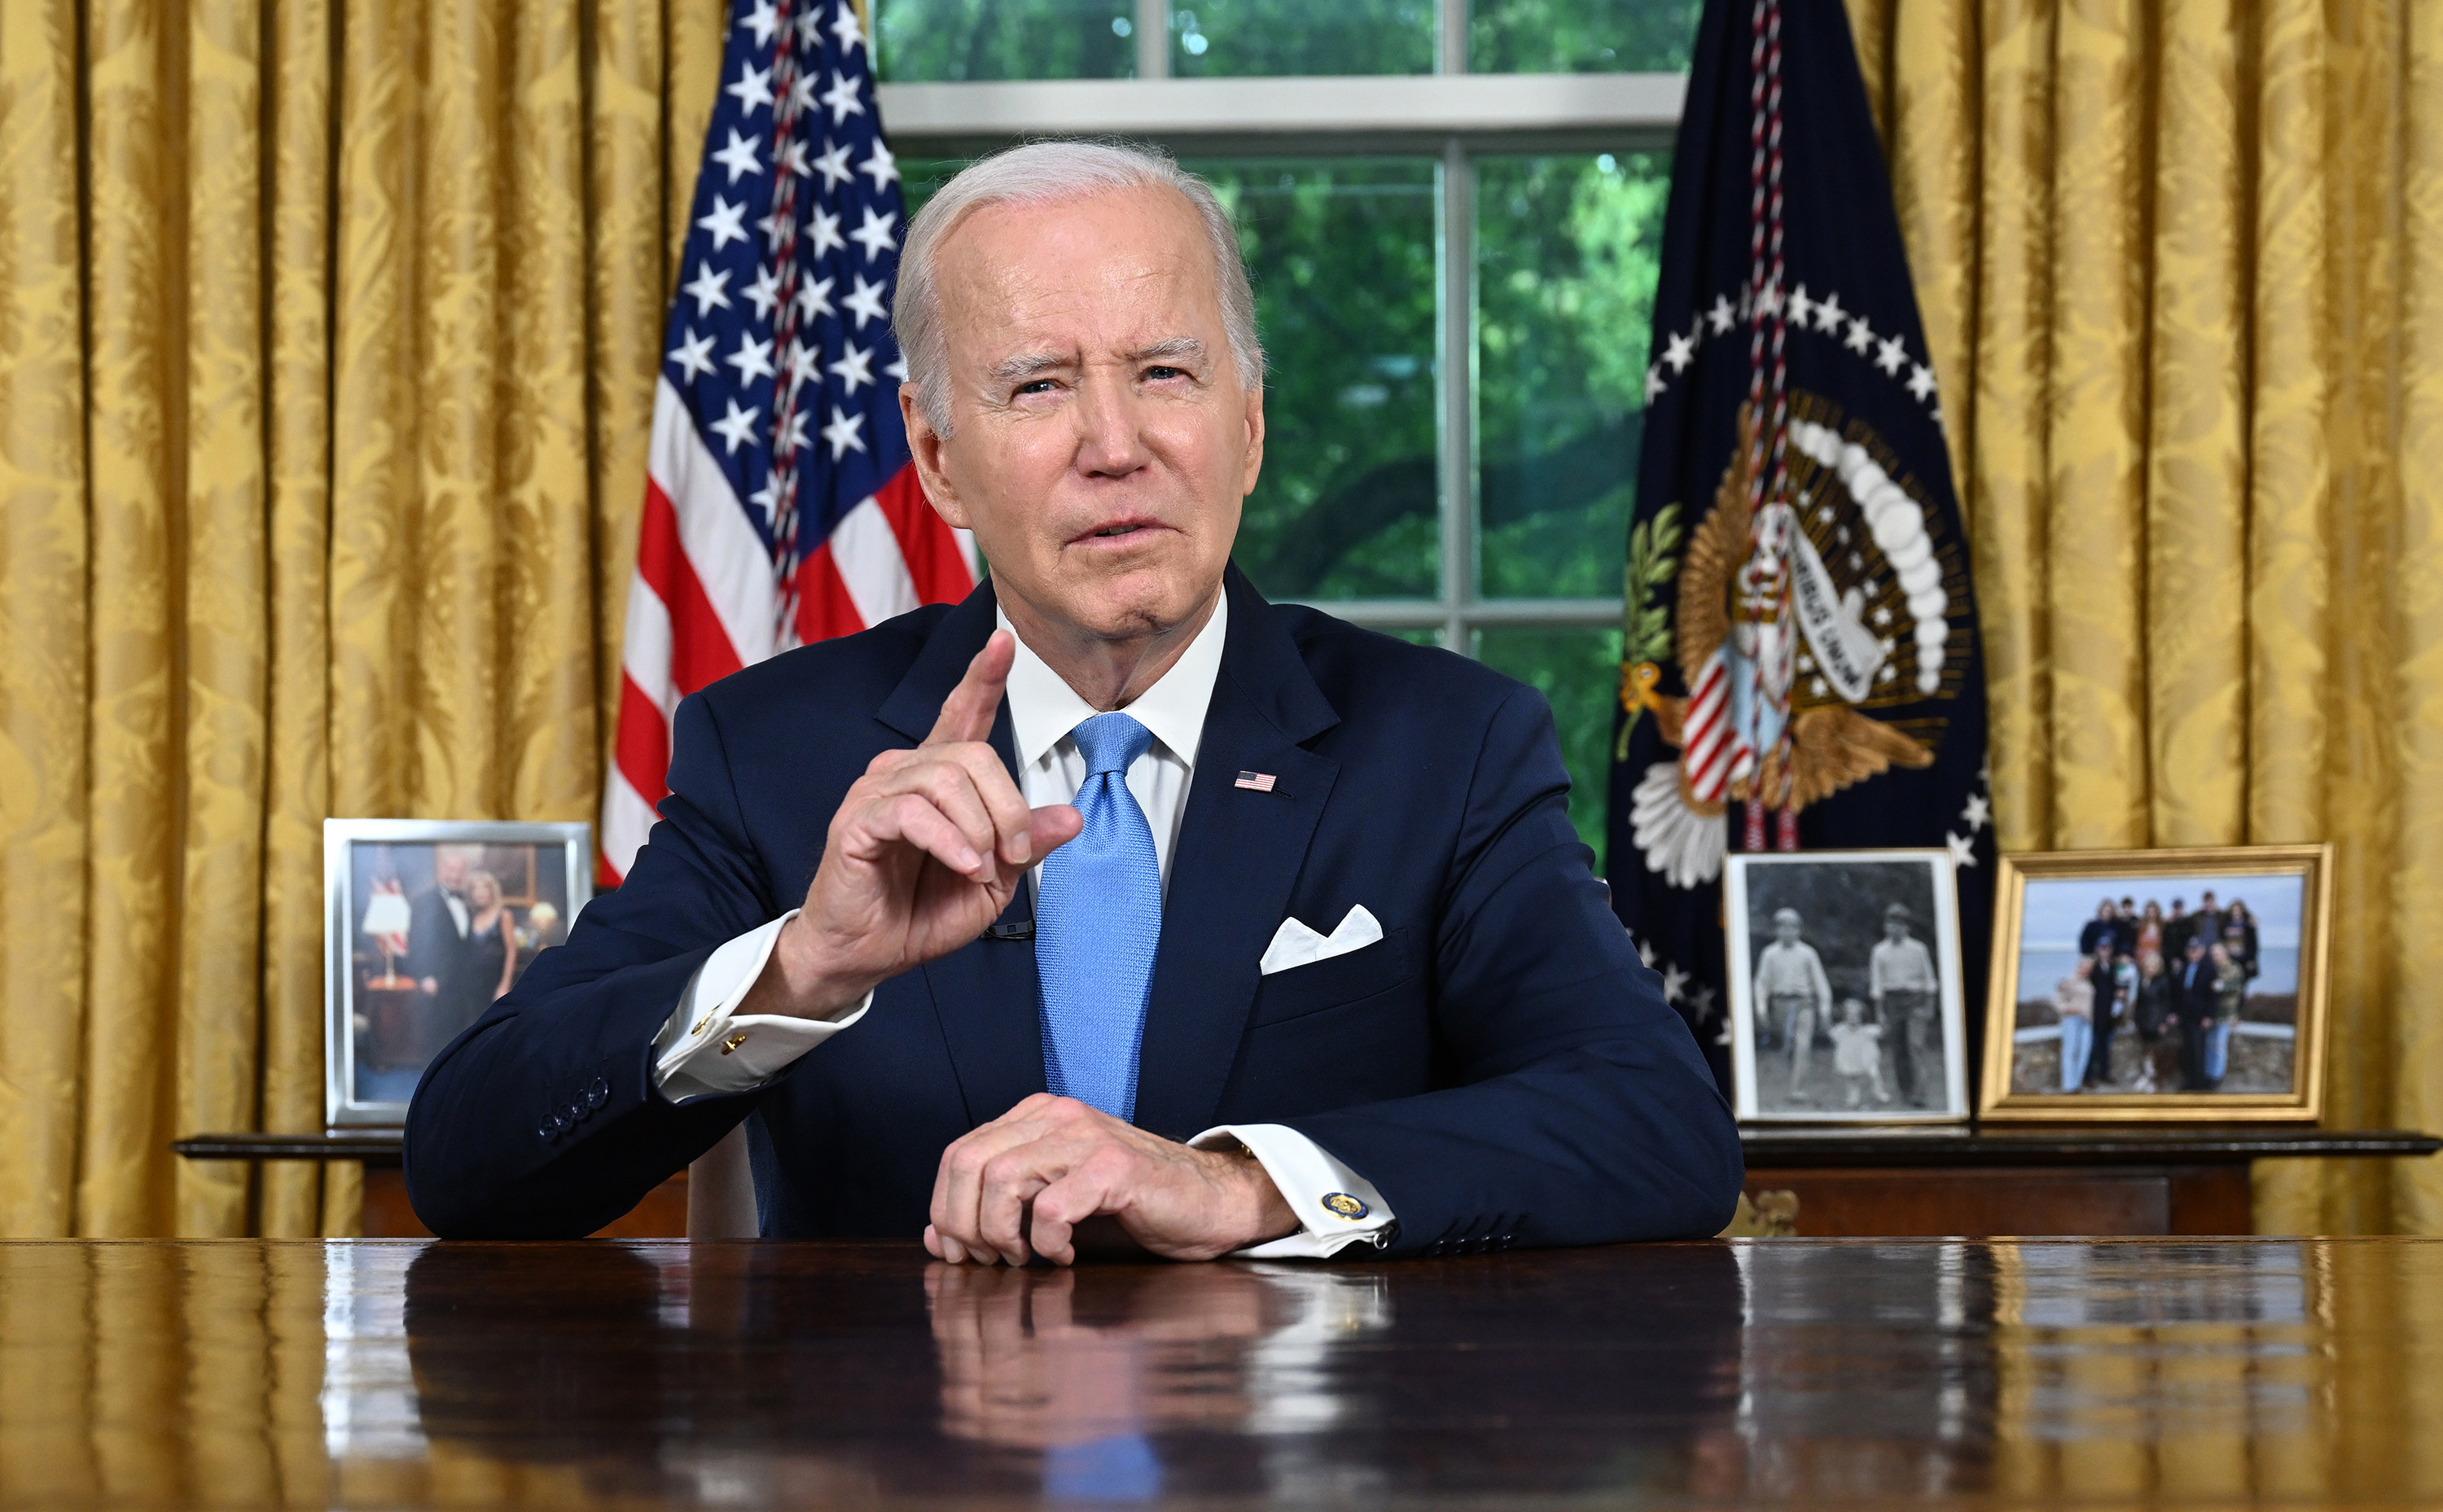 US President Joe Biden addresses the nation in the Oval Office of the White House on Friday in Washington. Photo: Pool / Getty Images / TNS